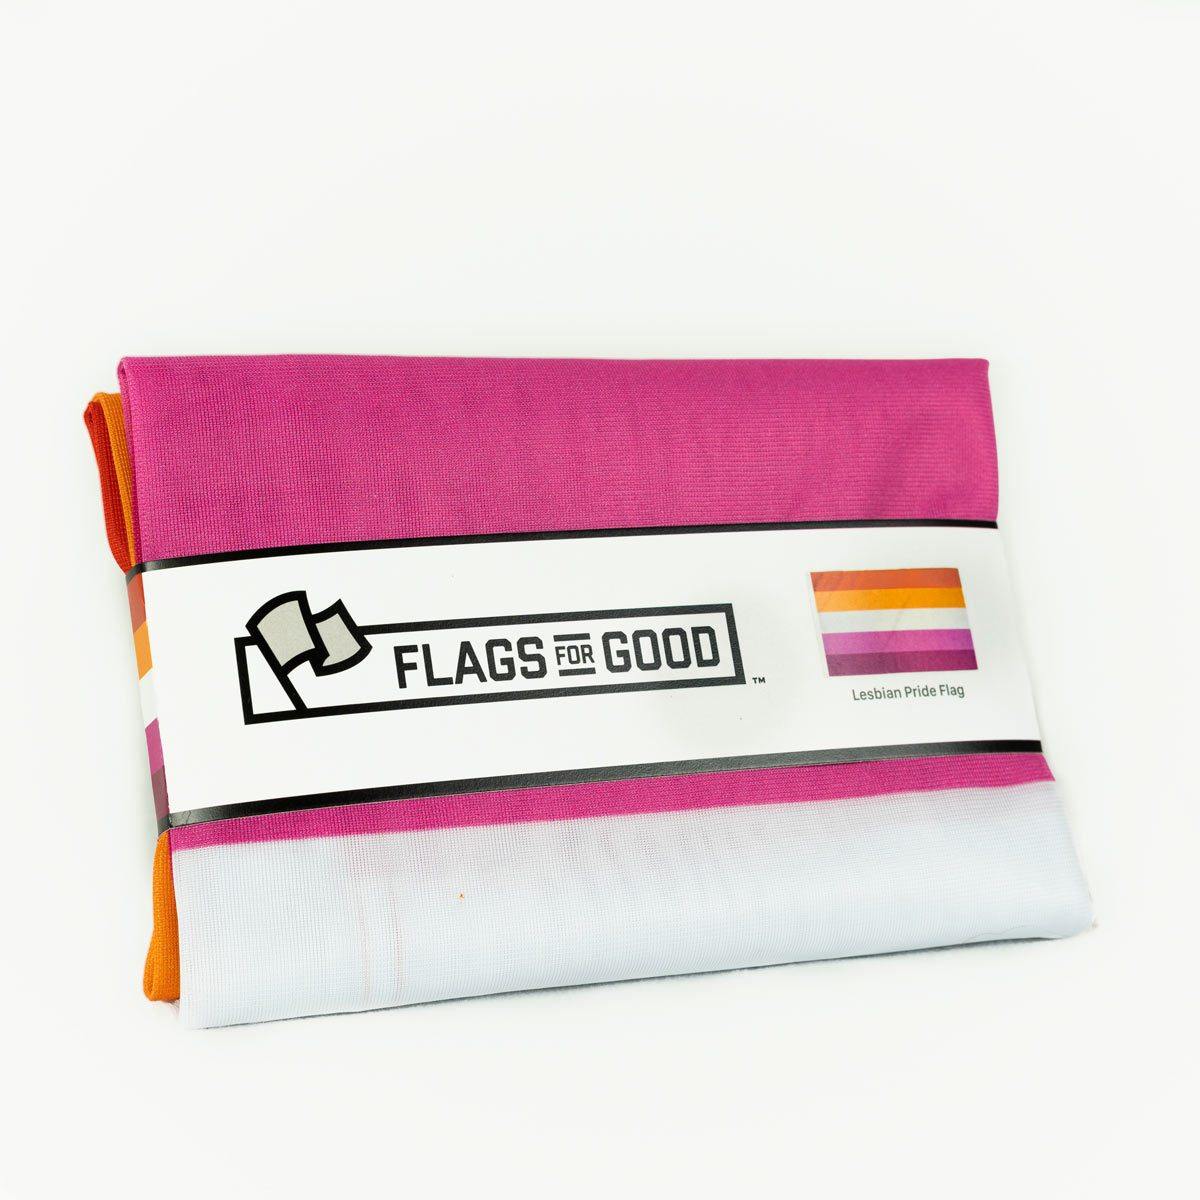 Lesbian Flag from flags for good